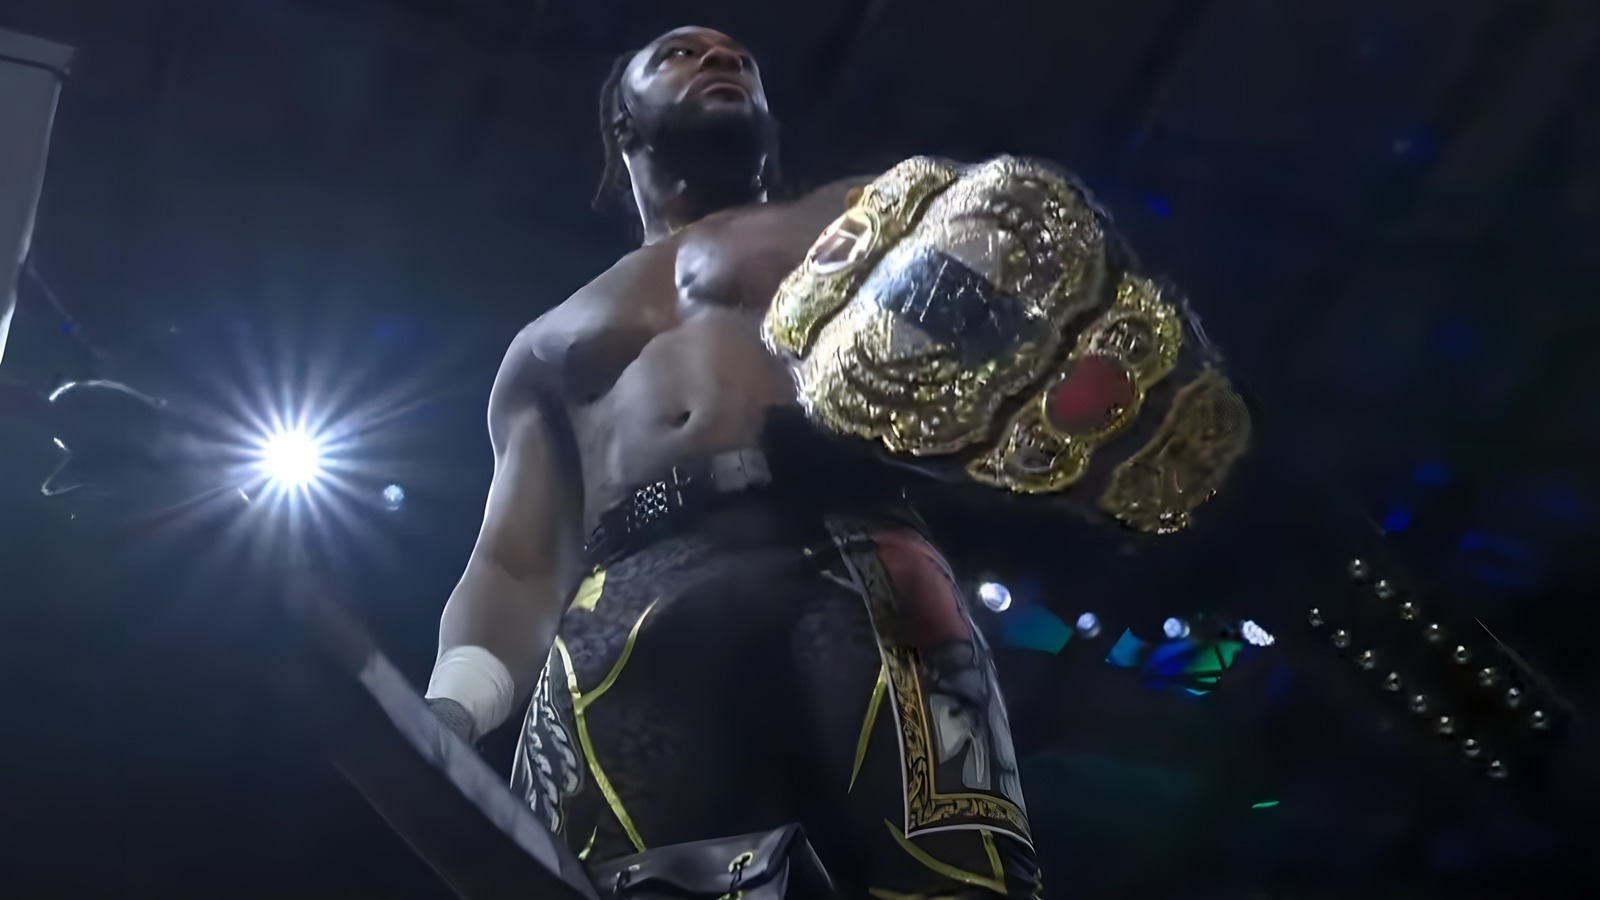 Swerve Strickland Beats Claudio Castagnoli On AEW Collision In First World Title Defense